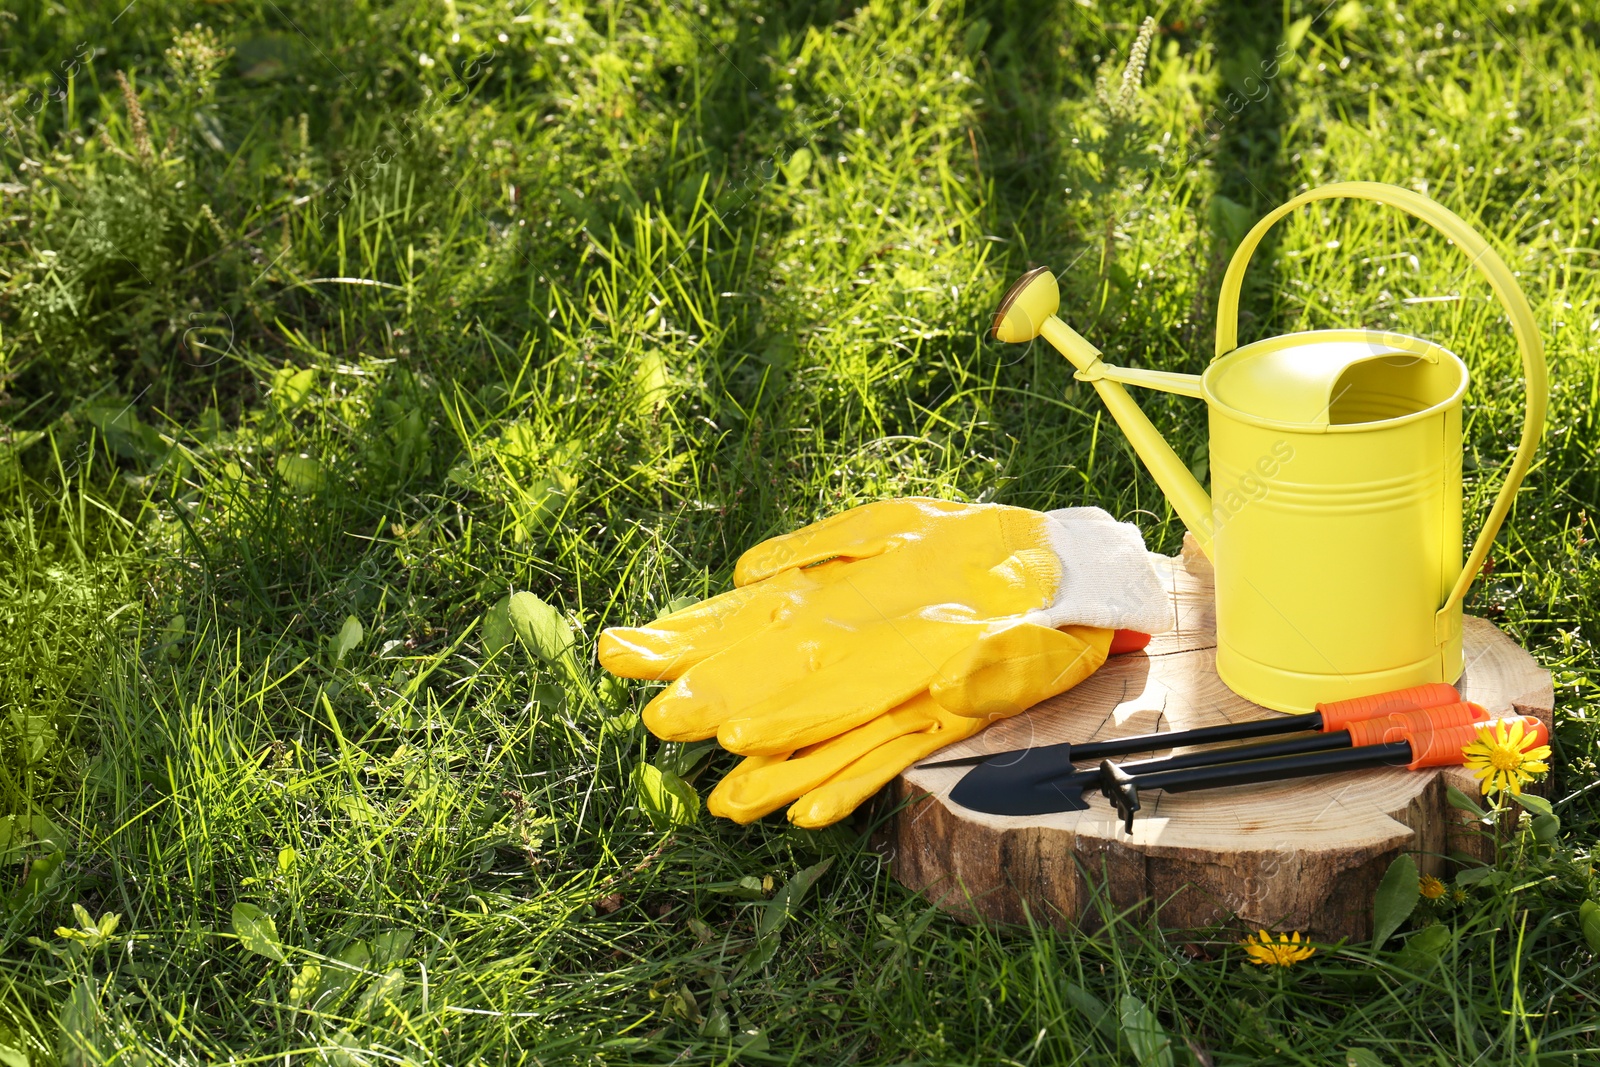 Photo of Pair of gloves, gardening tools and watering can on wooden stump among grass outdoors, space for text